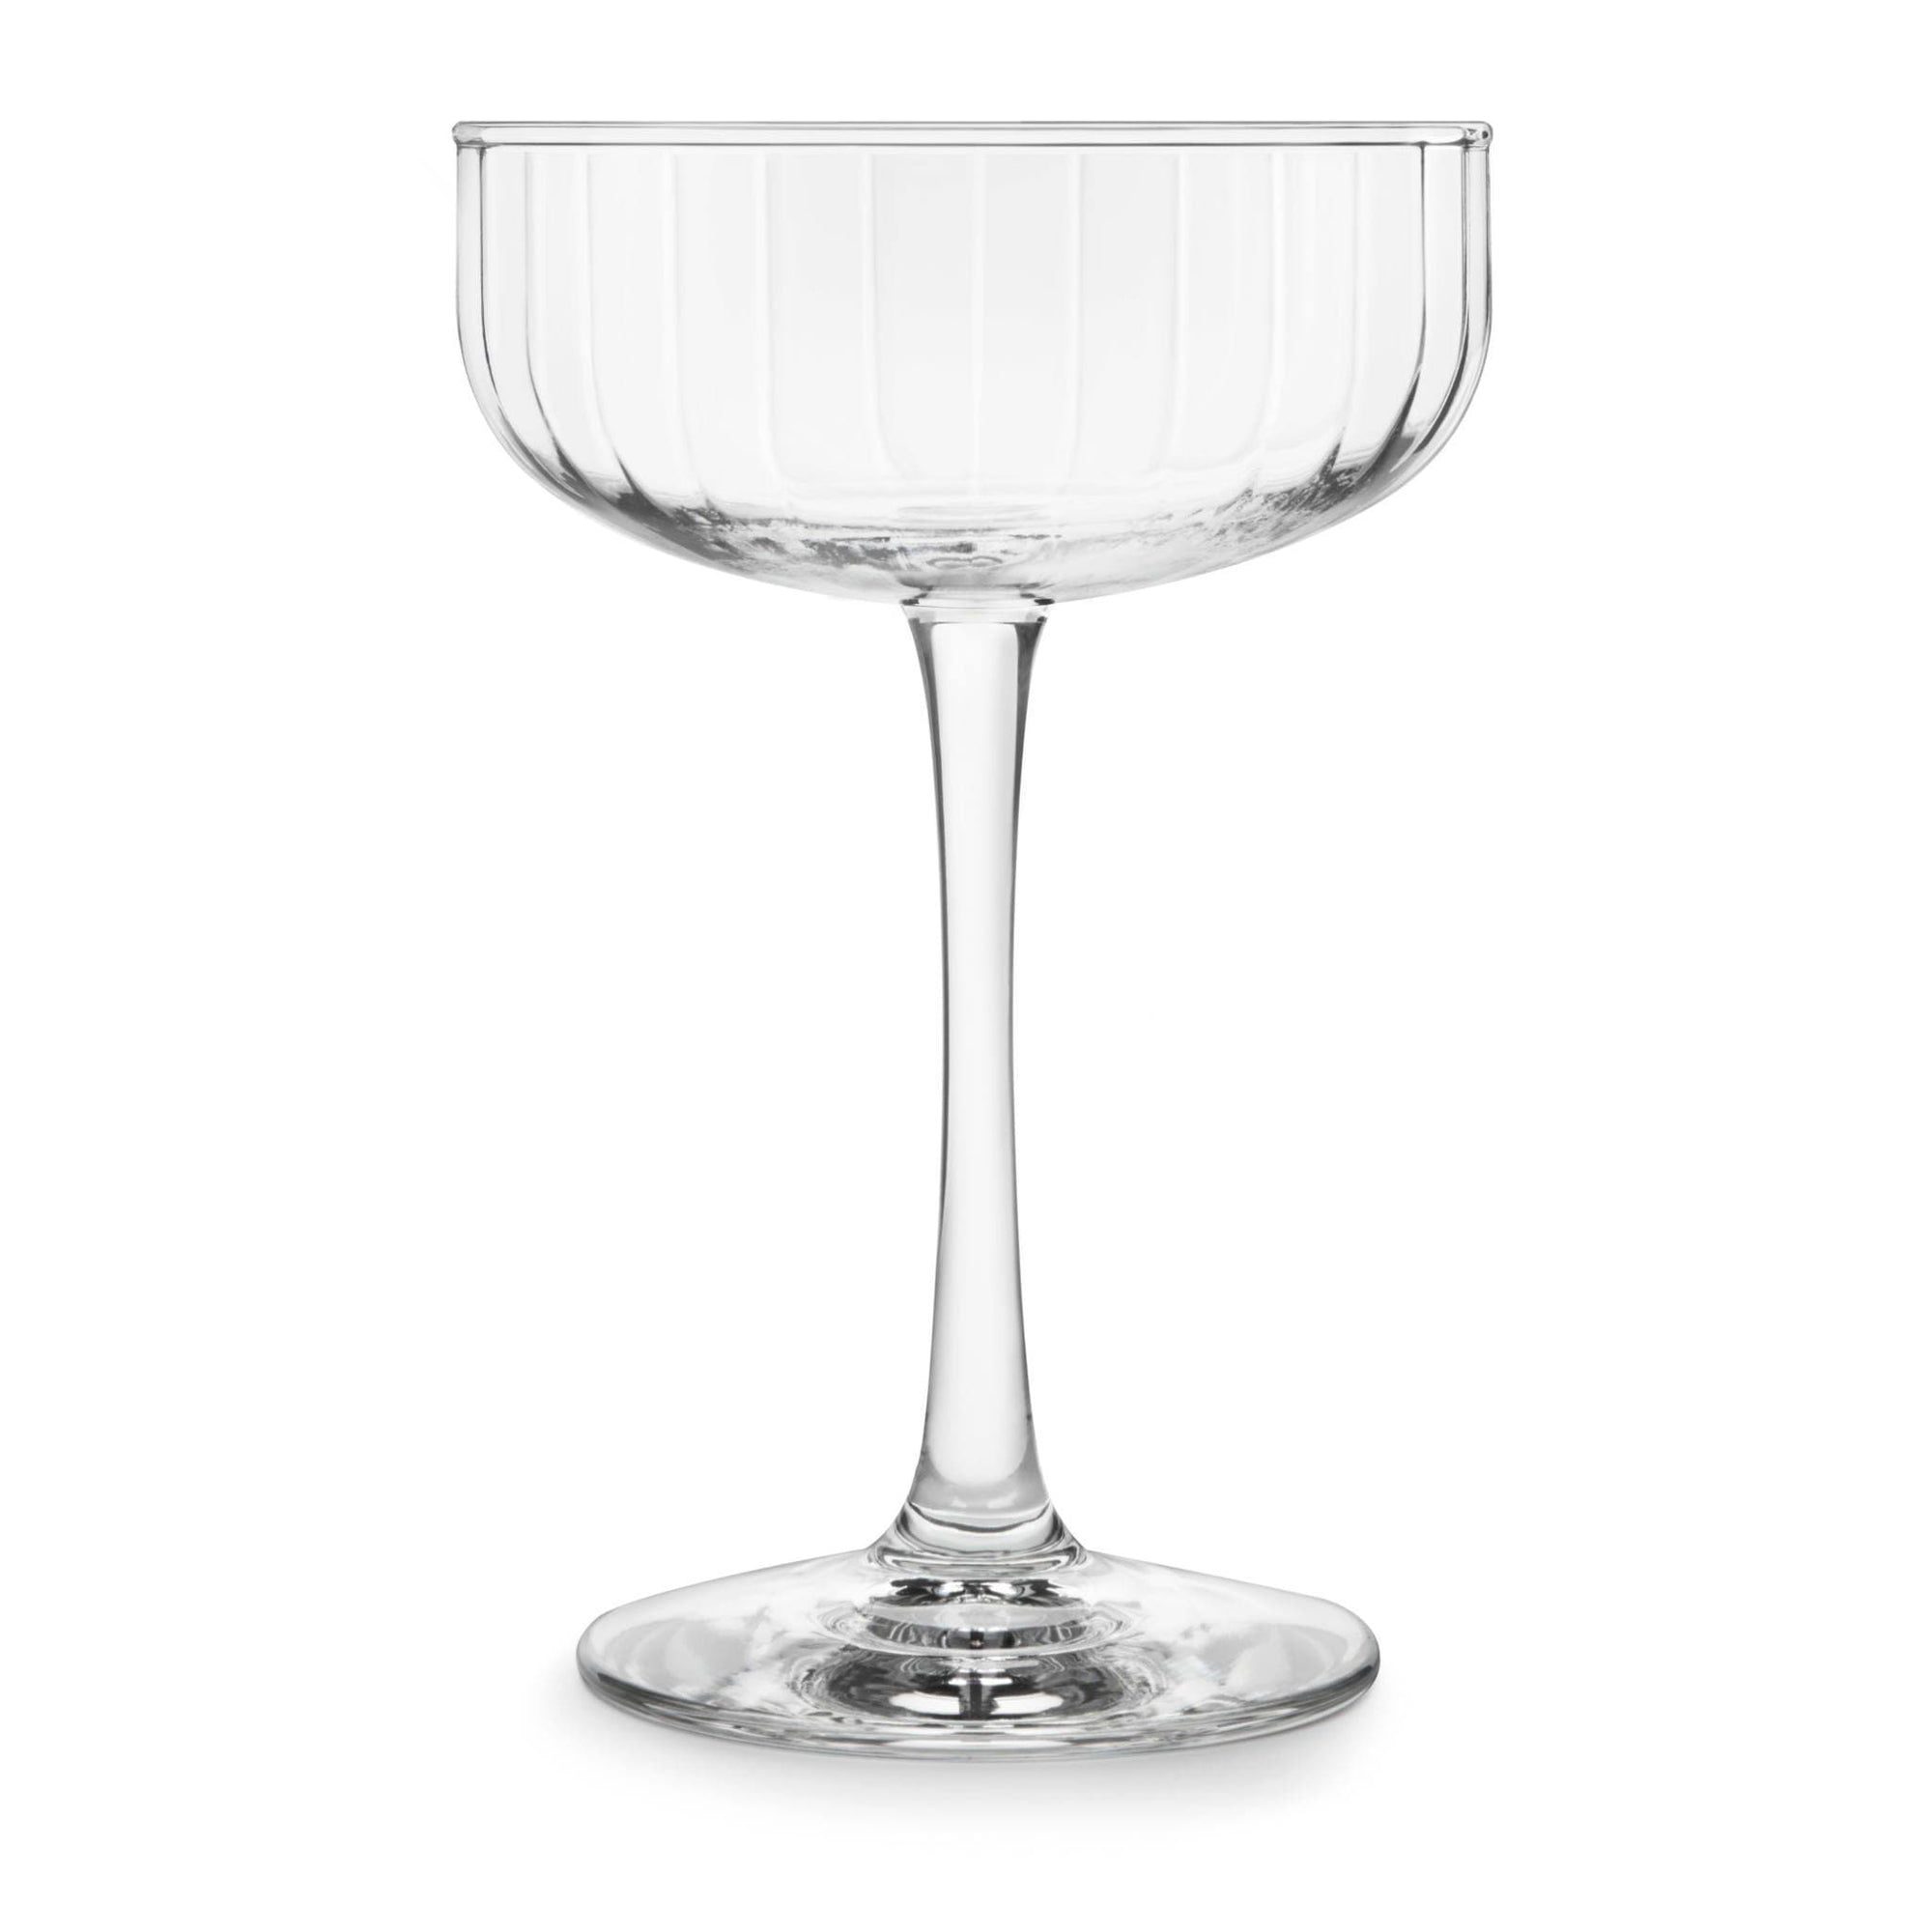 Paneled Coupe Cocktail Glasses, 8.5-ounce, Set of 4